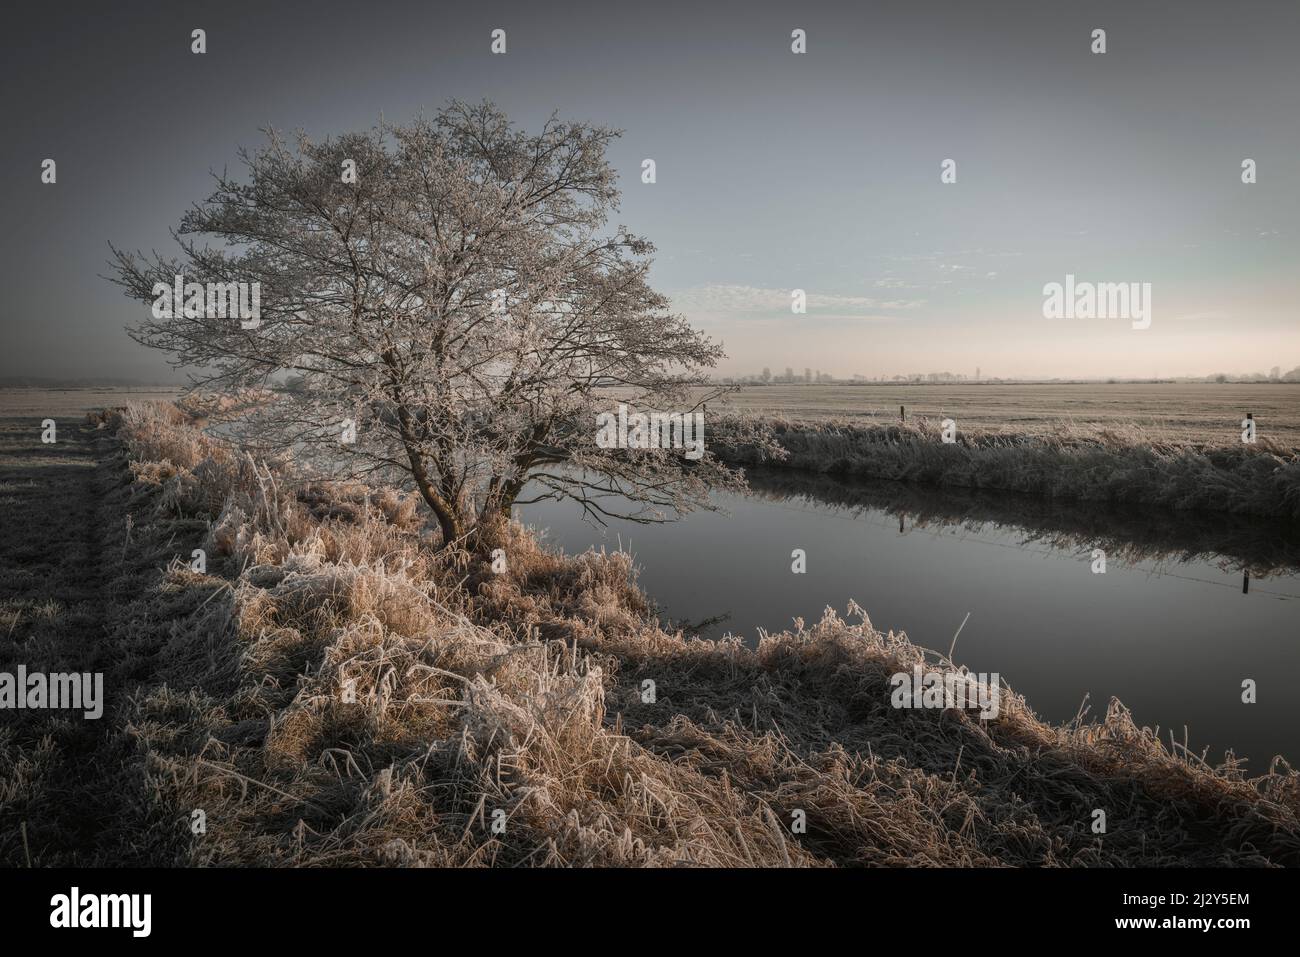 Tree at Friedeburger Tief in frost, Etzel, East Frisia, Lower Saxony, Germany, Europe Stock Photo